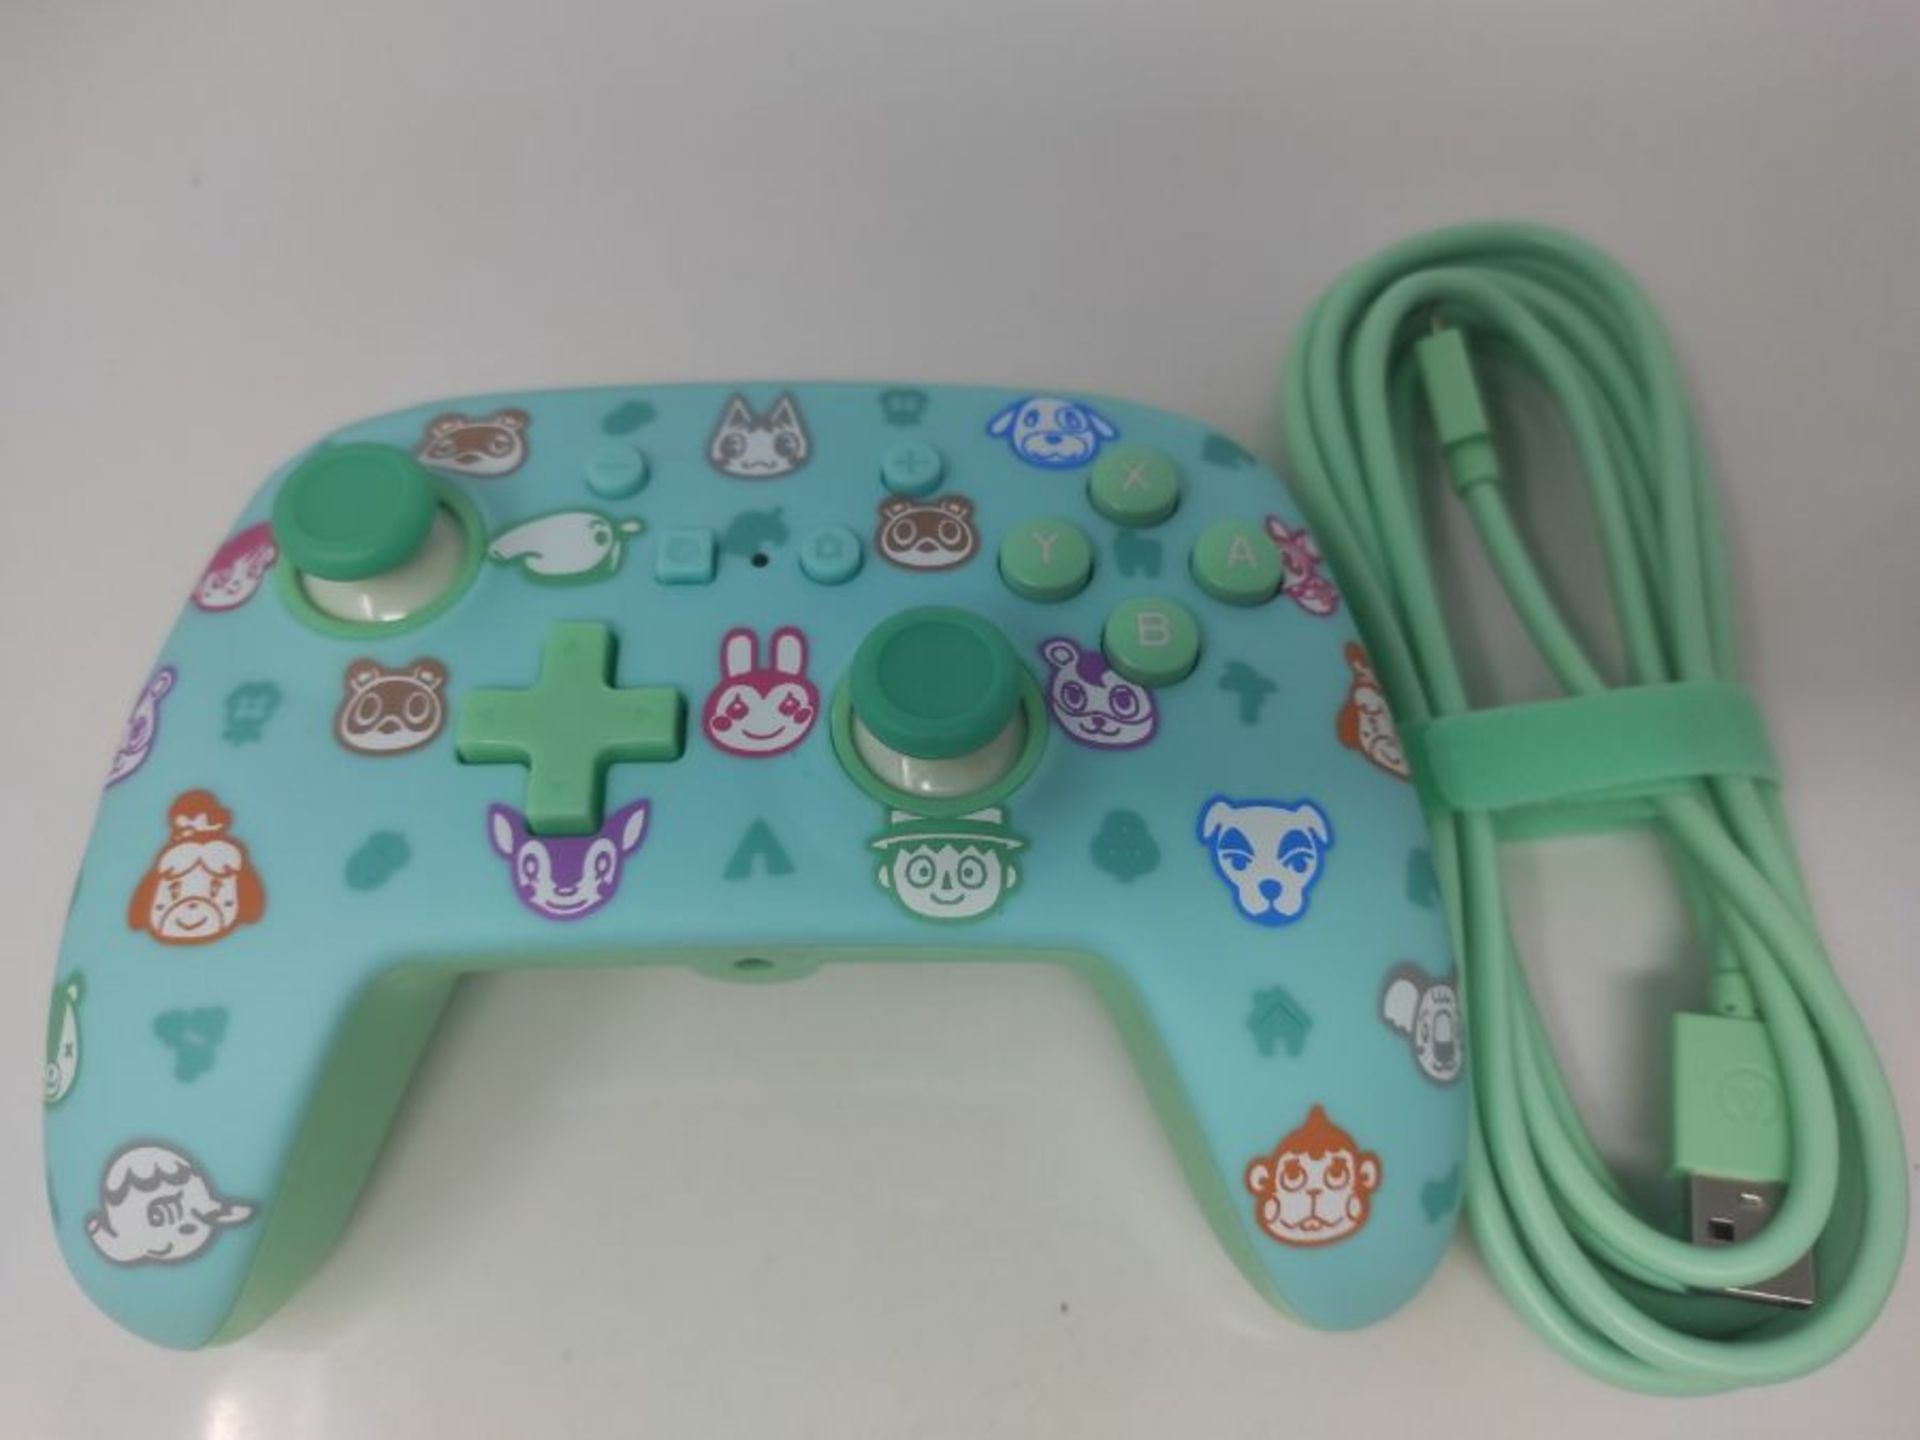 NSW EnWired Controller Animal Crossing New Horizons - Image 3 of 3